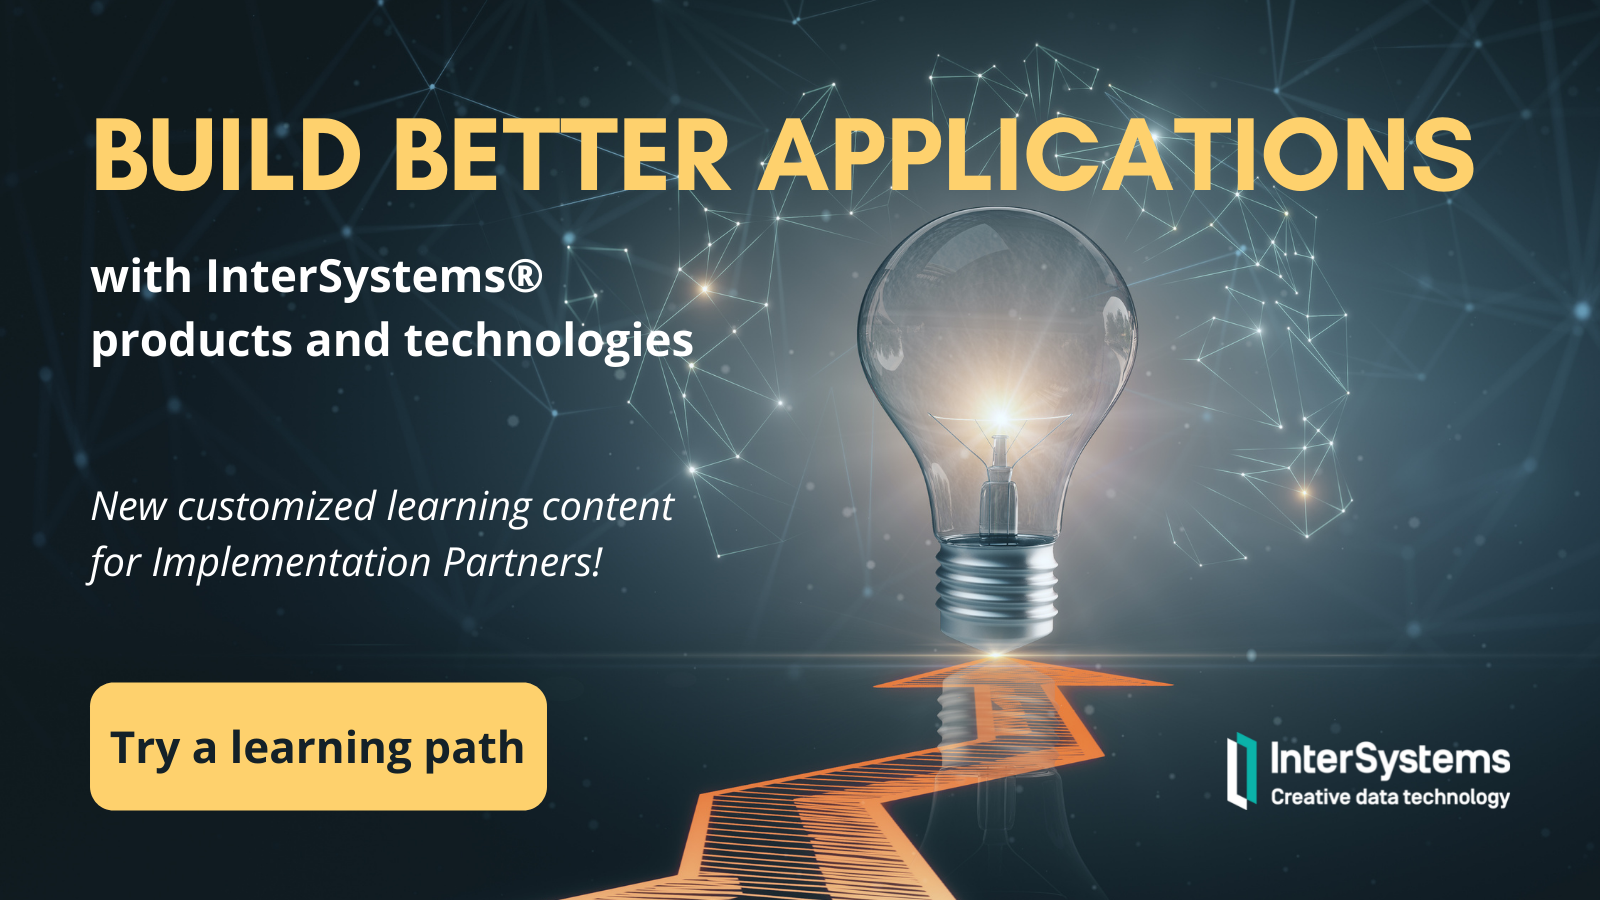 Build Better Applications with InterSystems® products and technologies. New customized learning content for Implementation partners. Try a learning path.